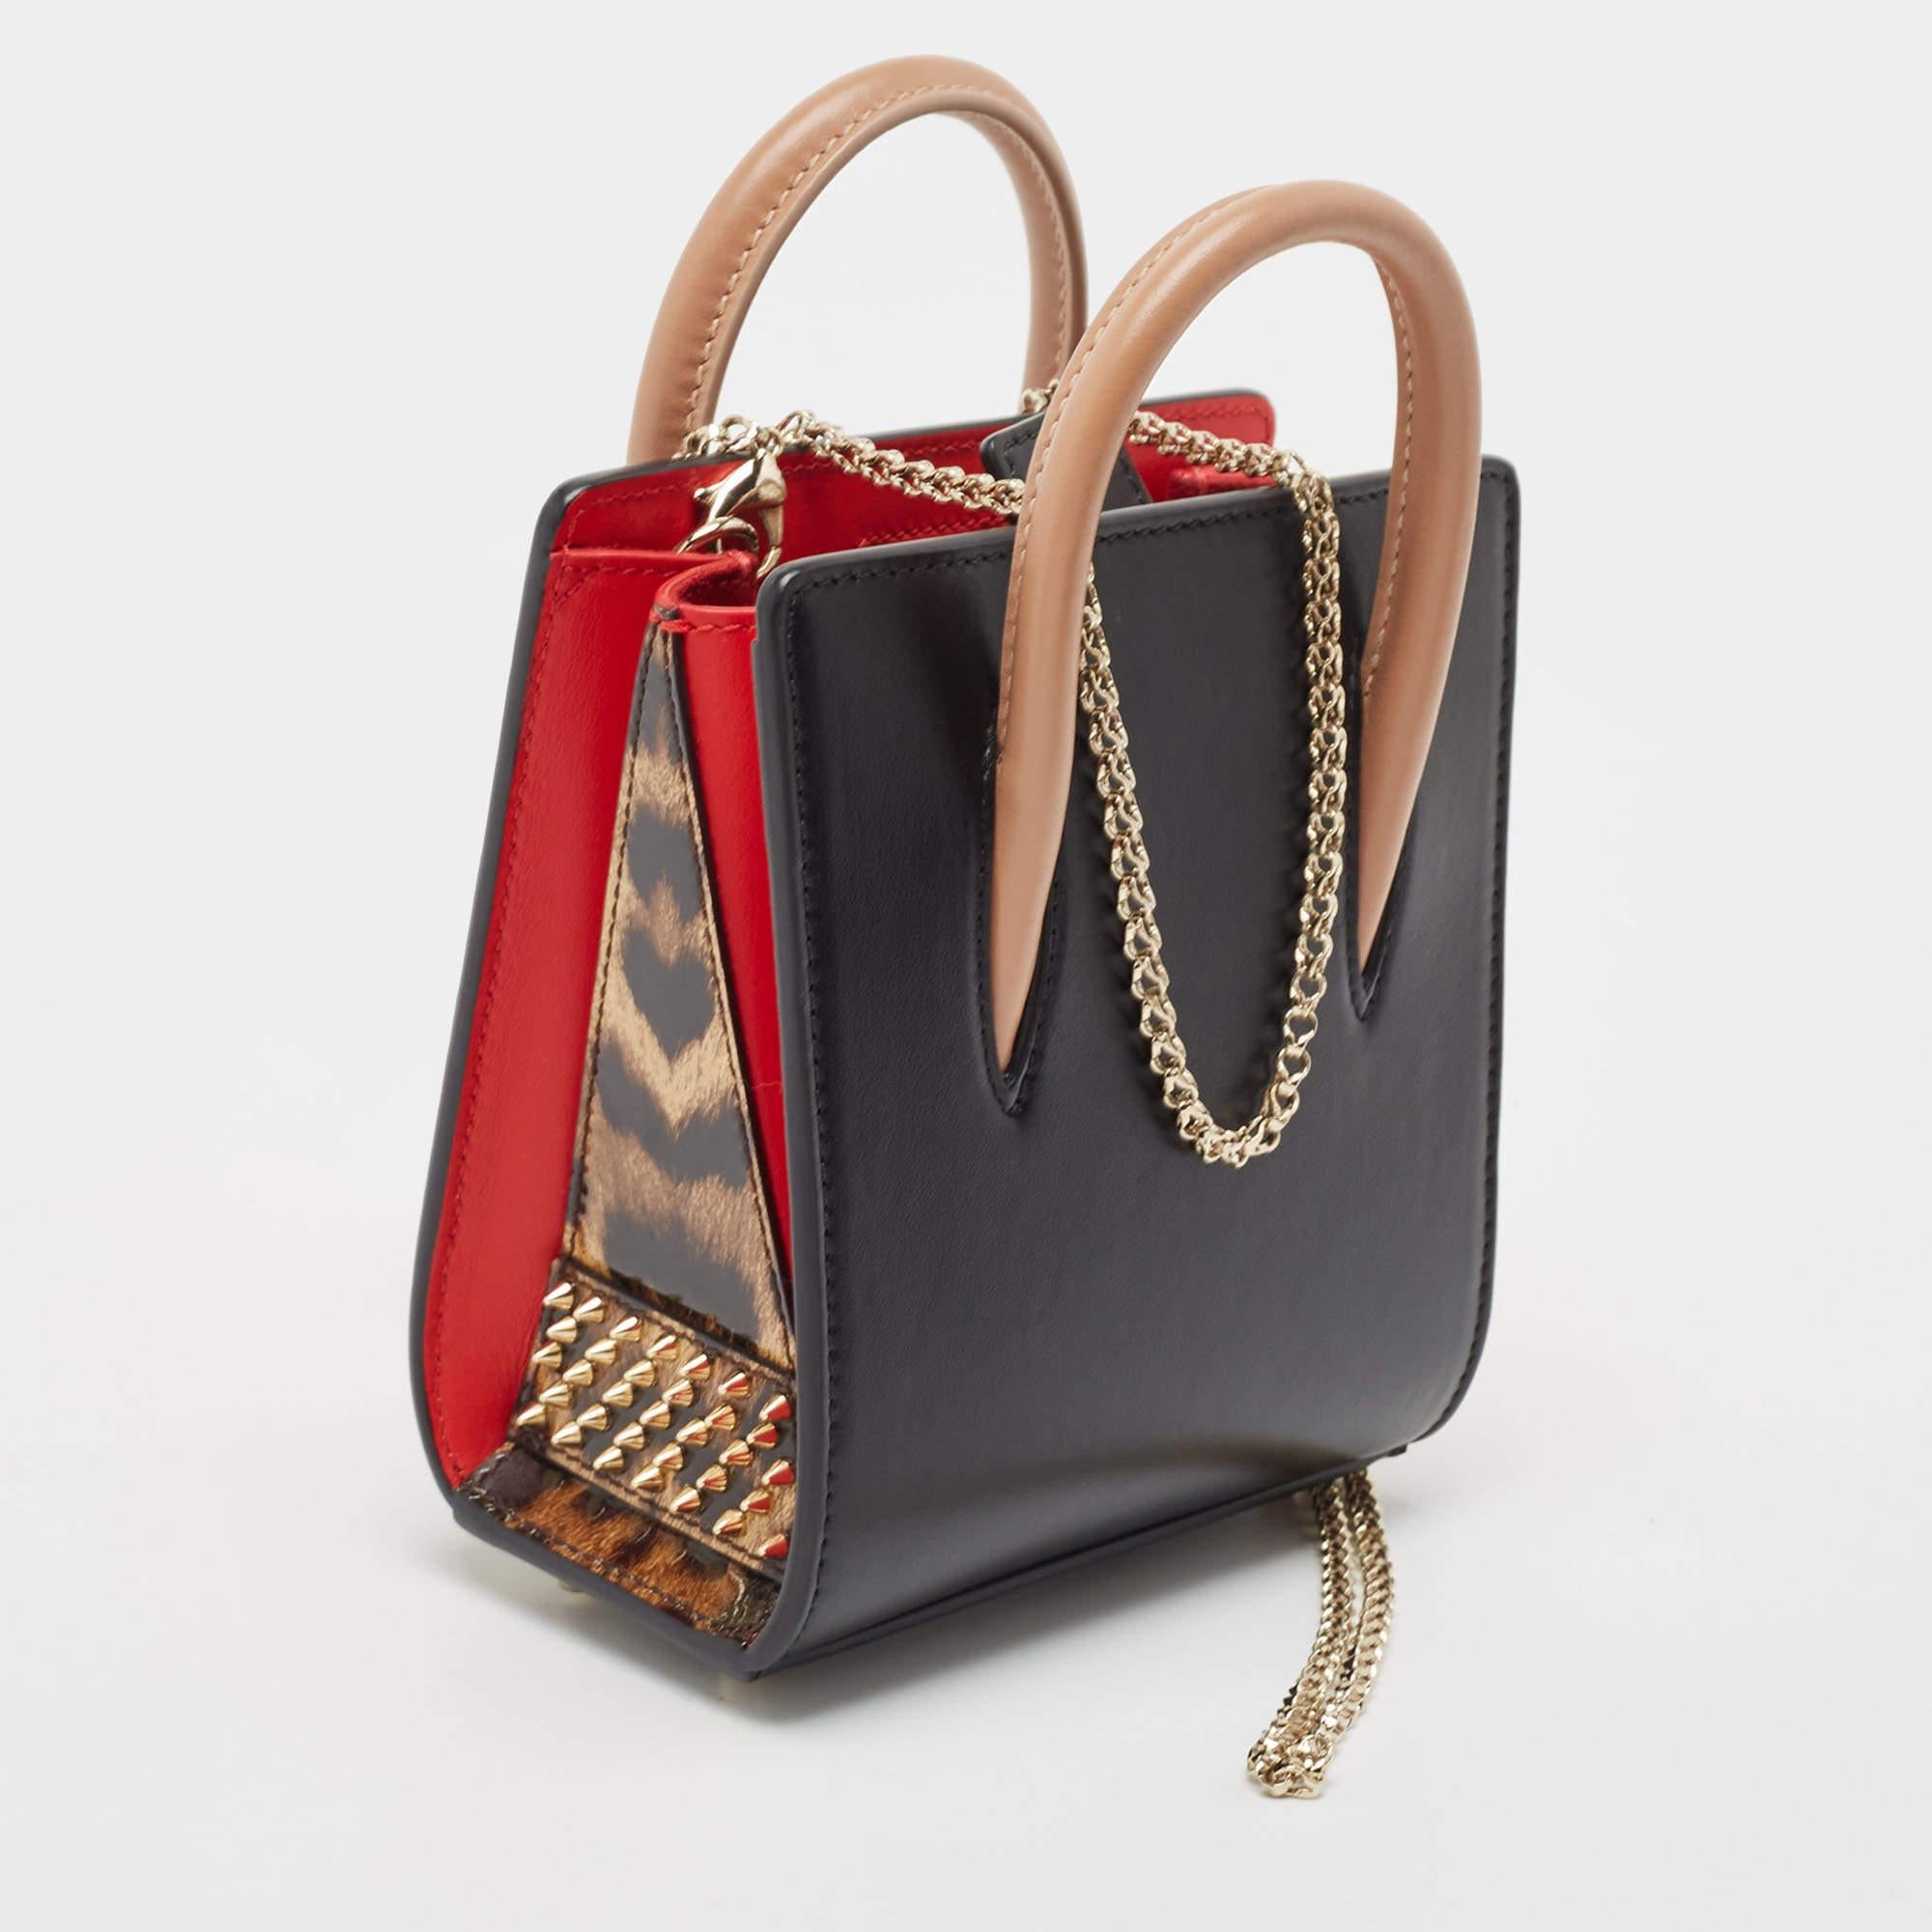 This Christian Louboutin tote is a result of blending high crafting skills with a practical design. It arrives in a durable exterior and is completed by luxe detailing. It is an accessory that you can count on.

